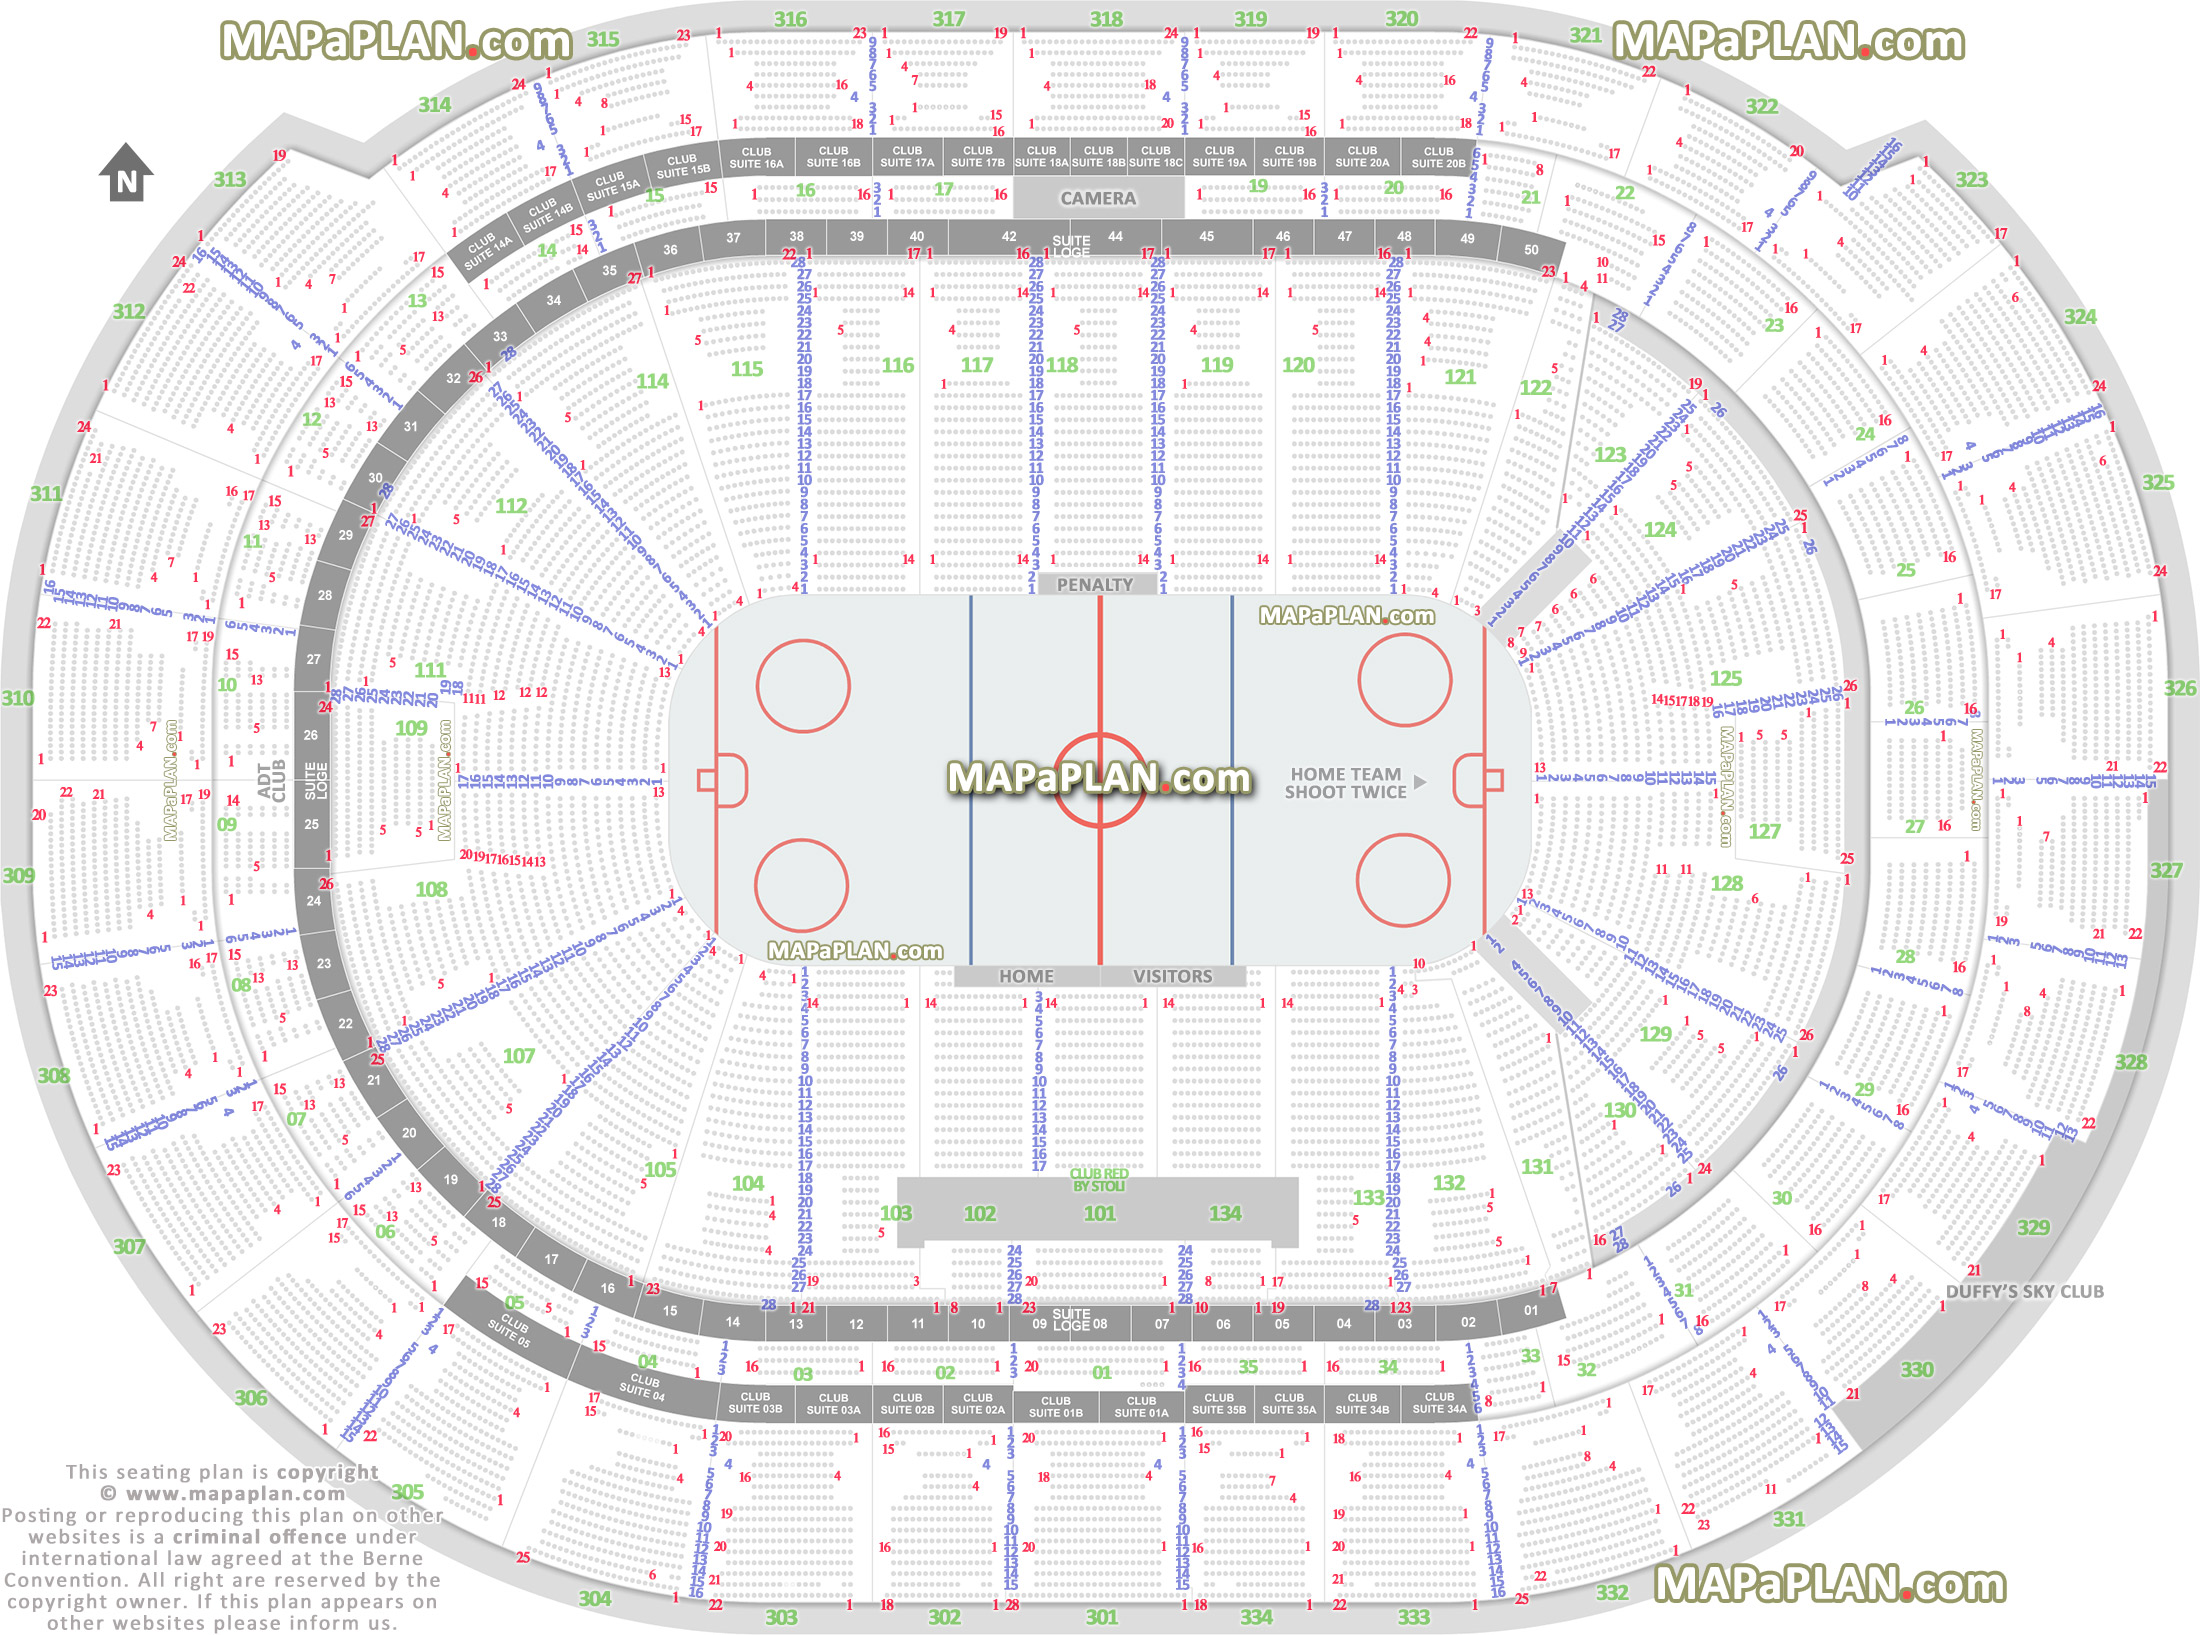 florida panthers new nhl stadium ice hockey rink individual find my seat locator penalty box adt club luxury suites duffys sky area Sunrise BBT Center seating chart